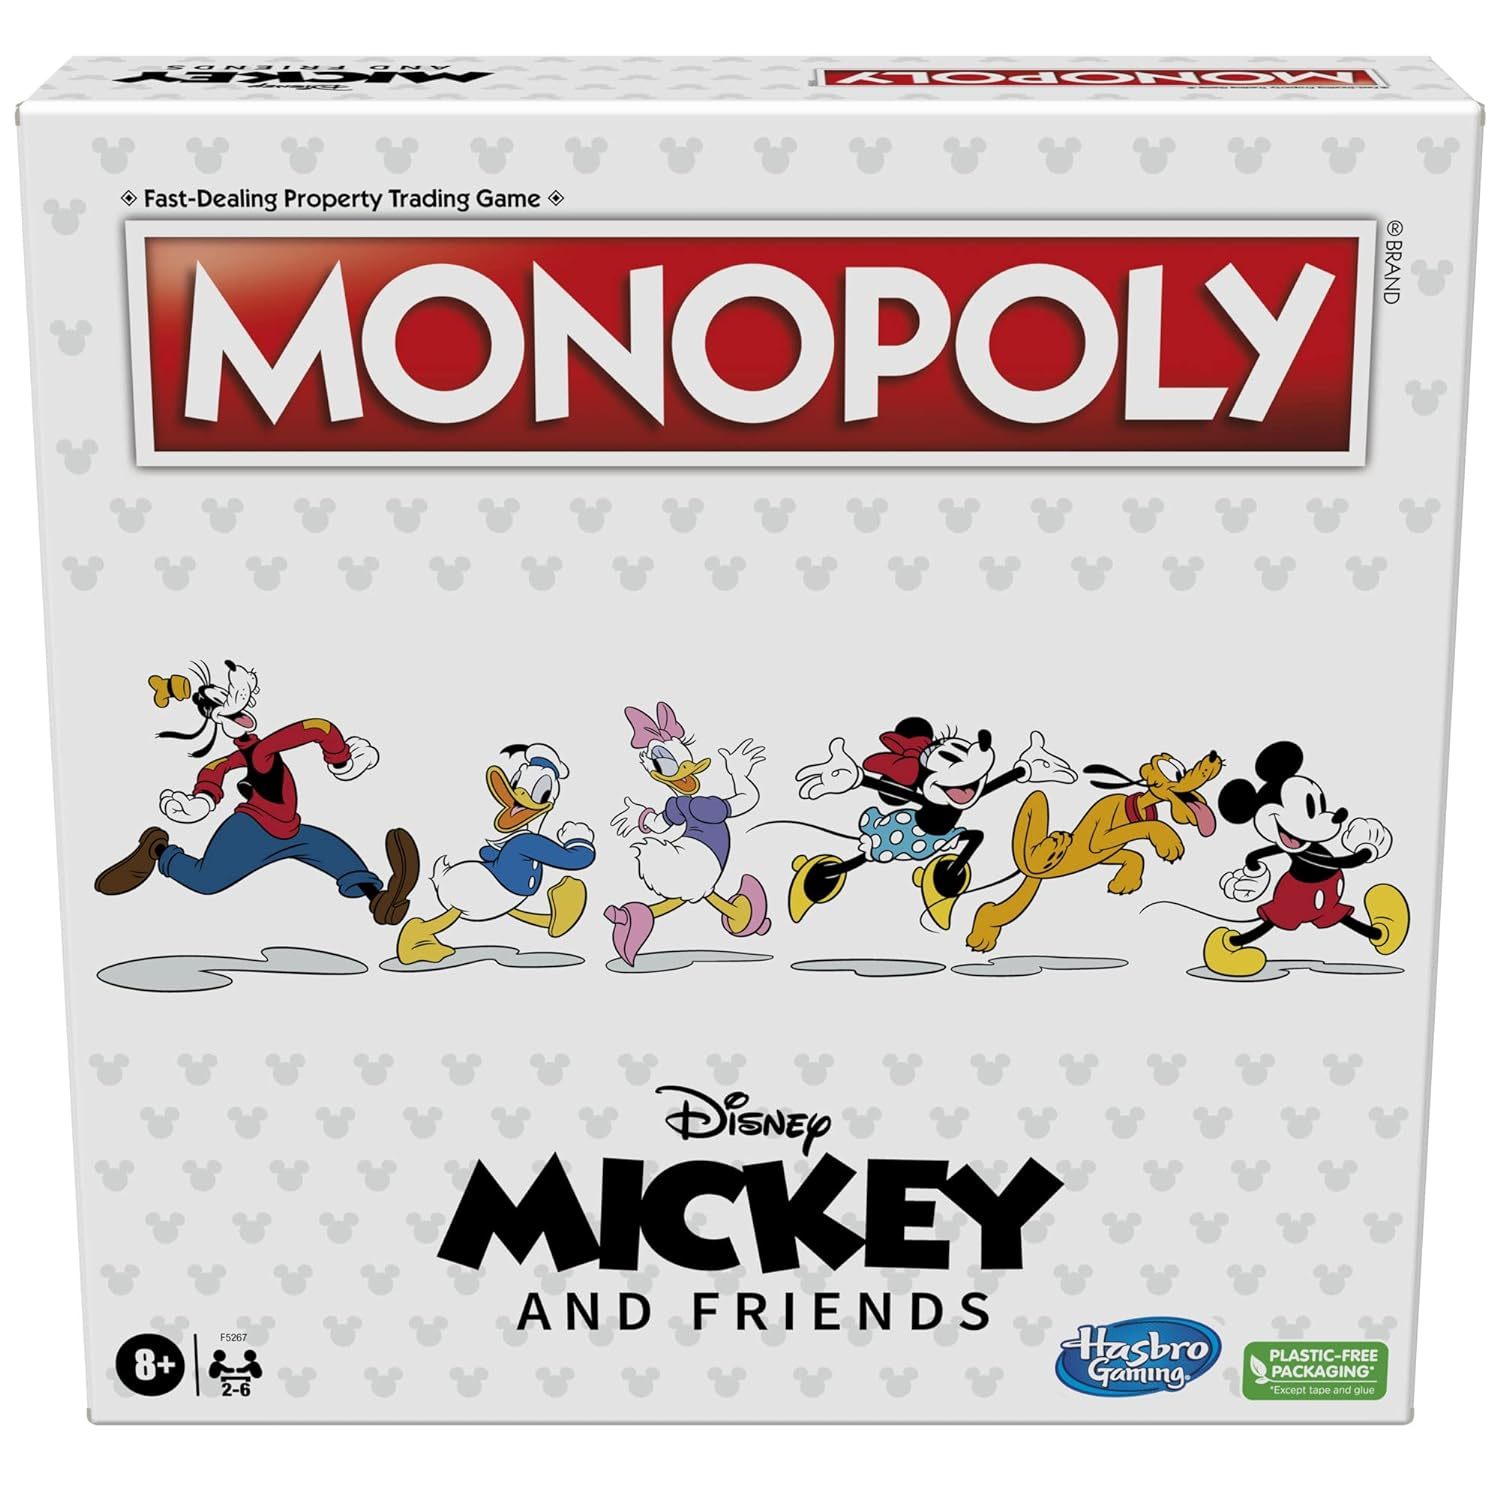 Primary image for Monopoly: Disney Mickey and Friends Edition Board Game, Ages 8+, for Disney Fans